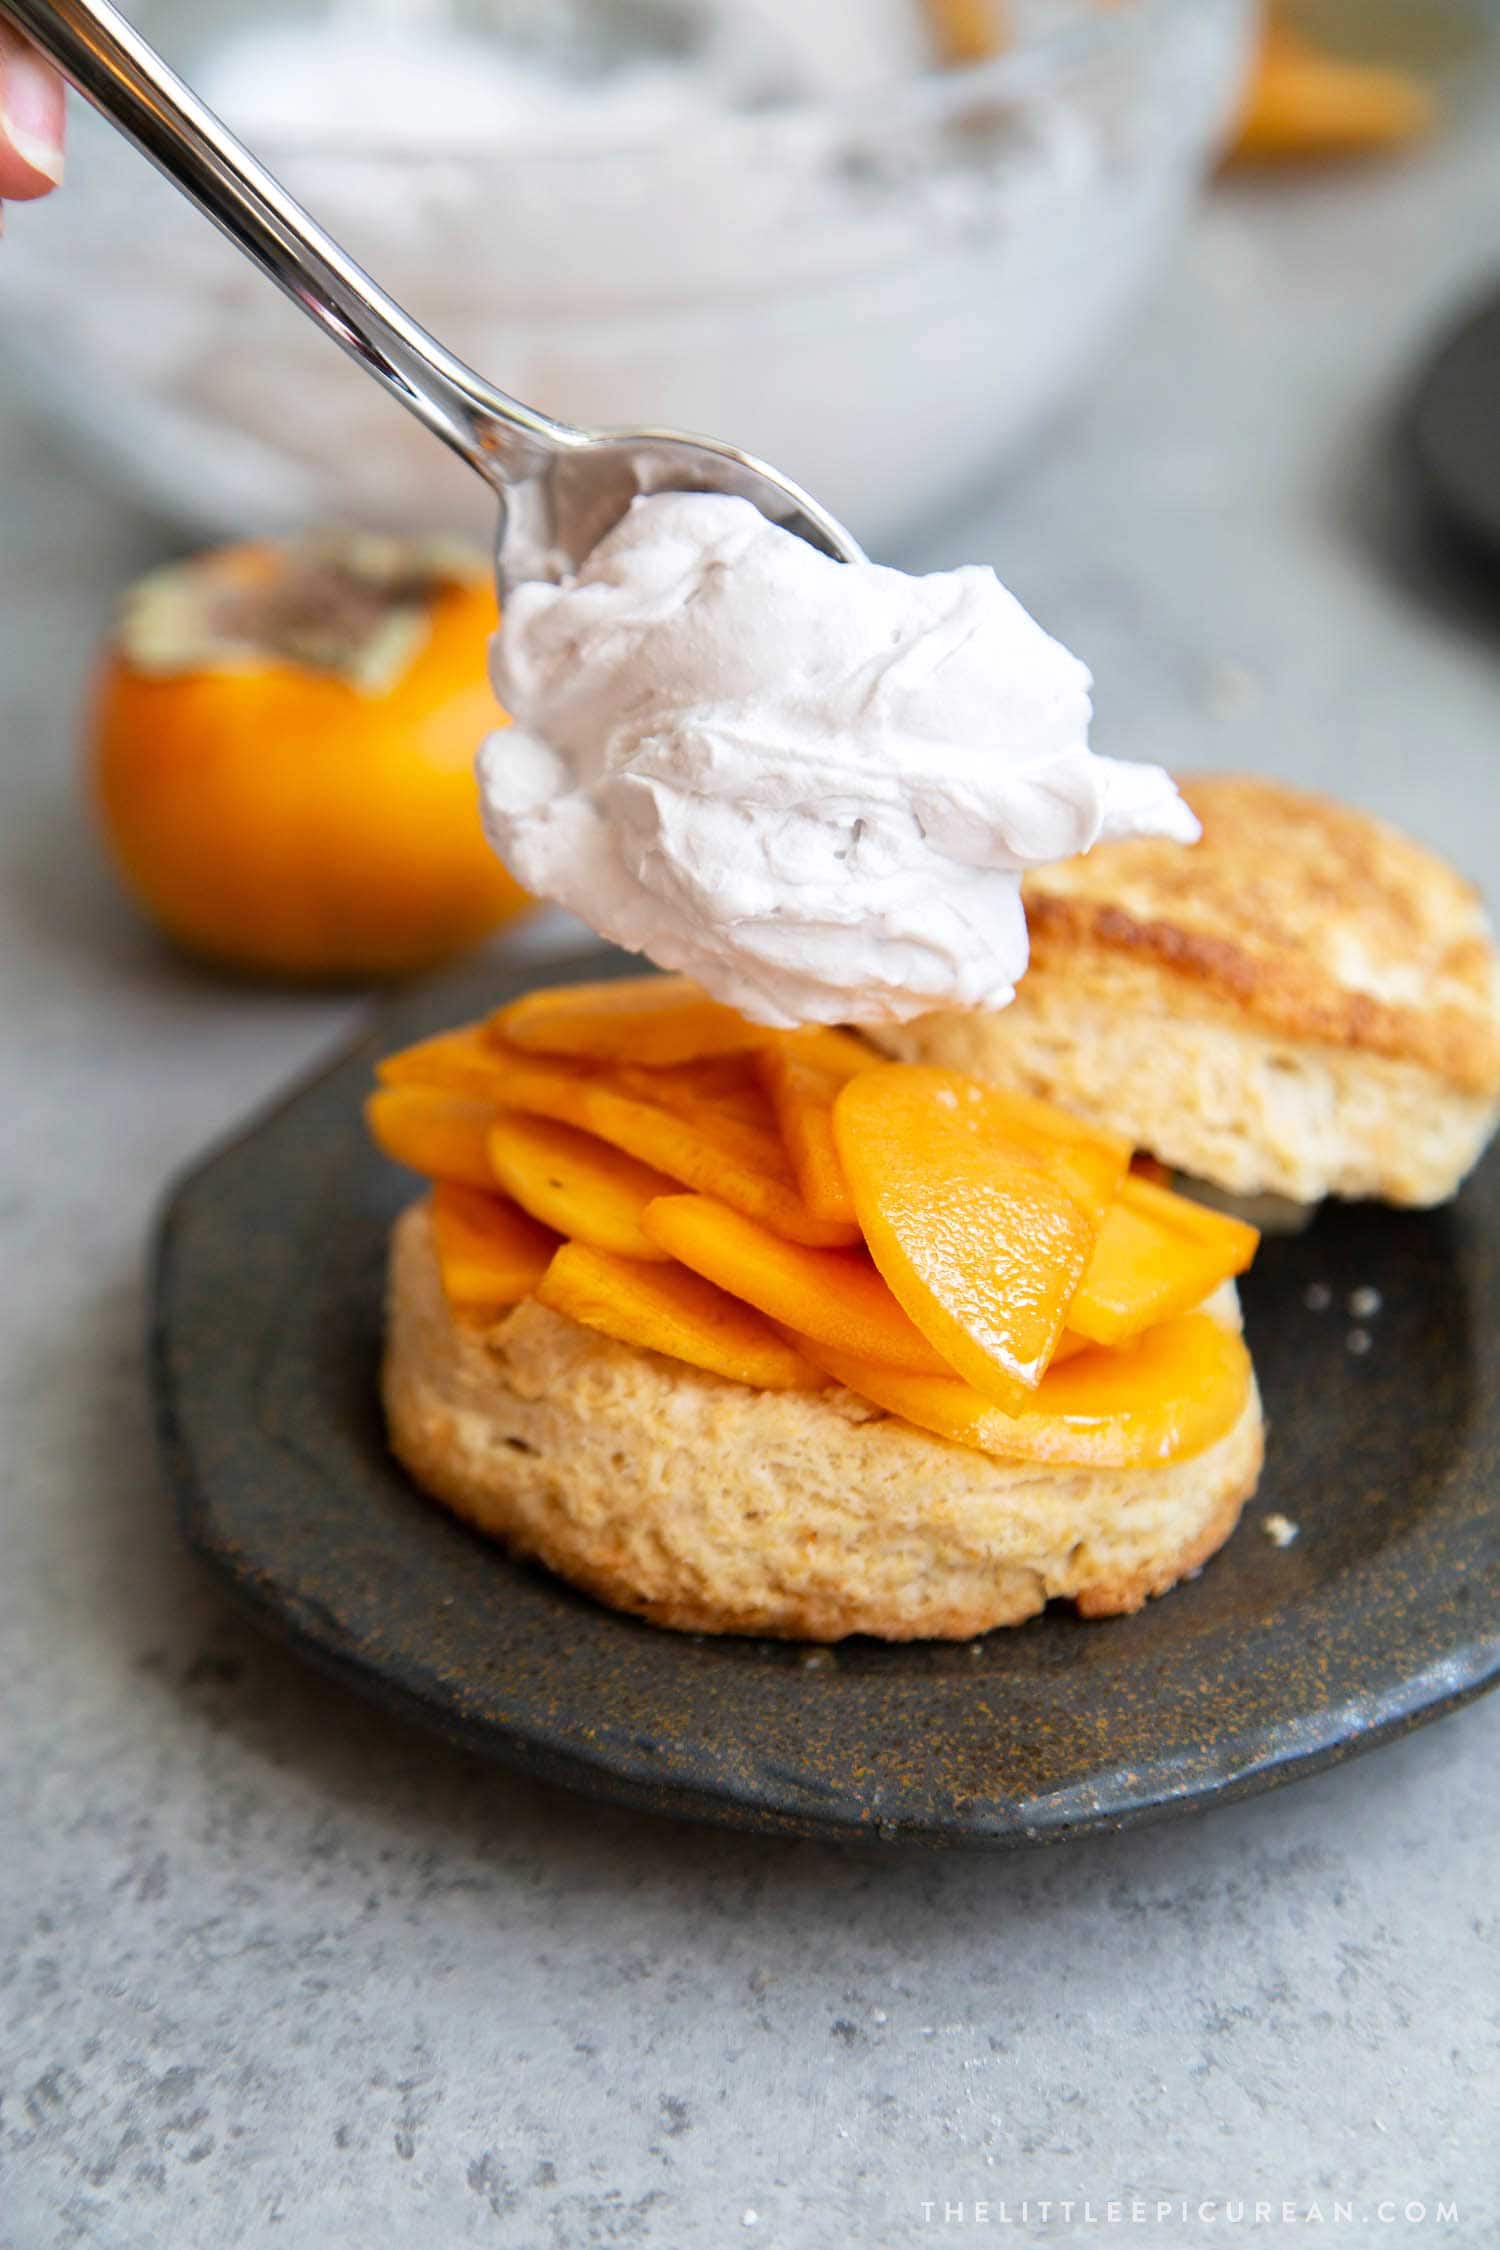 Coconut Persimmon Shortcake. A new spin strawberry shortcake. This dessert features coconut milk shortcake biscuits filled with sliced persimmons and coconut whipped cream. #persimmons #fuyupersimmons #fallbaking #shortcake #biscuits